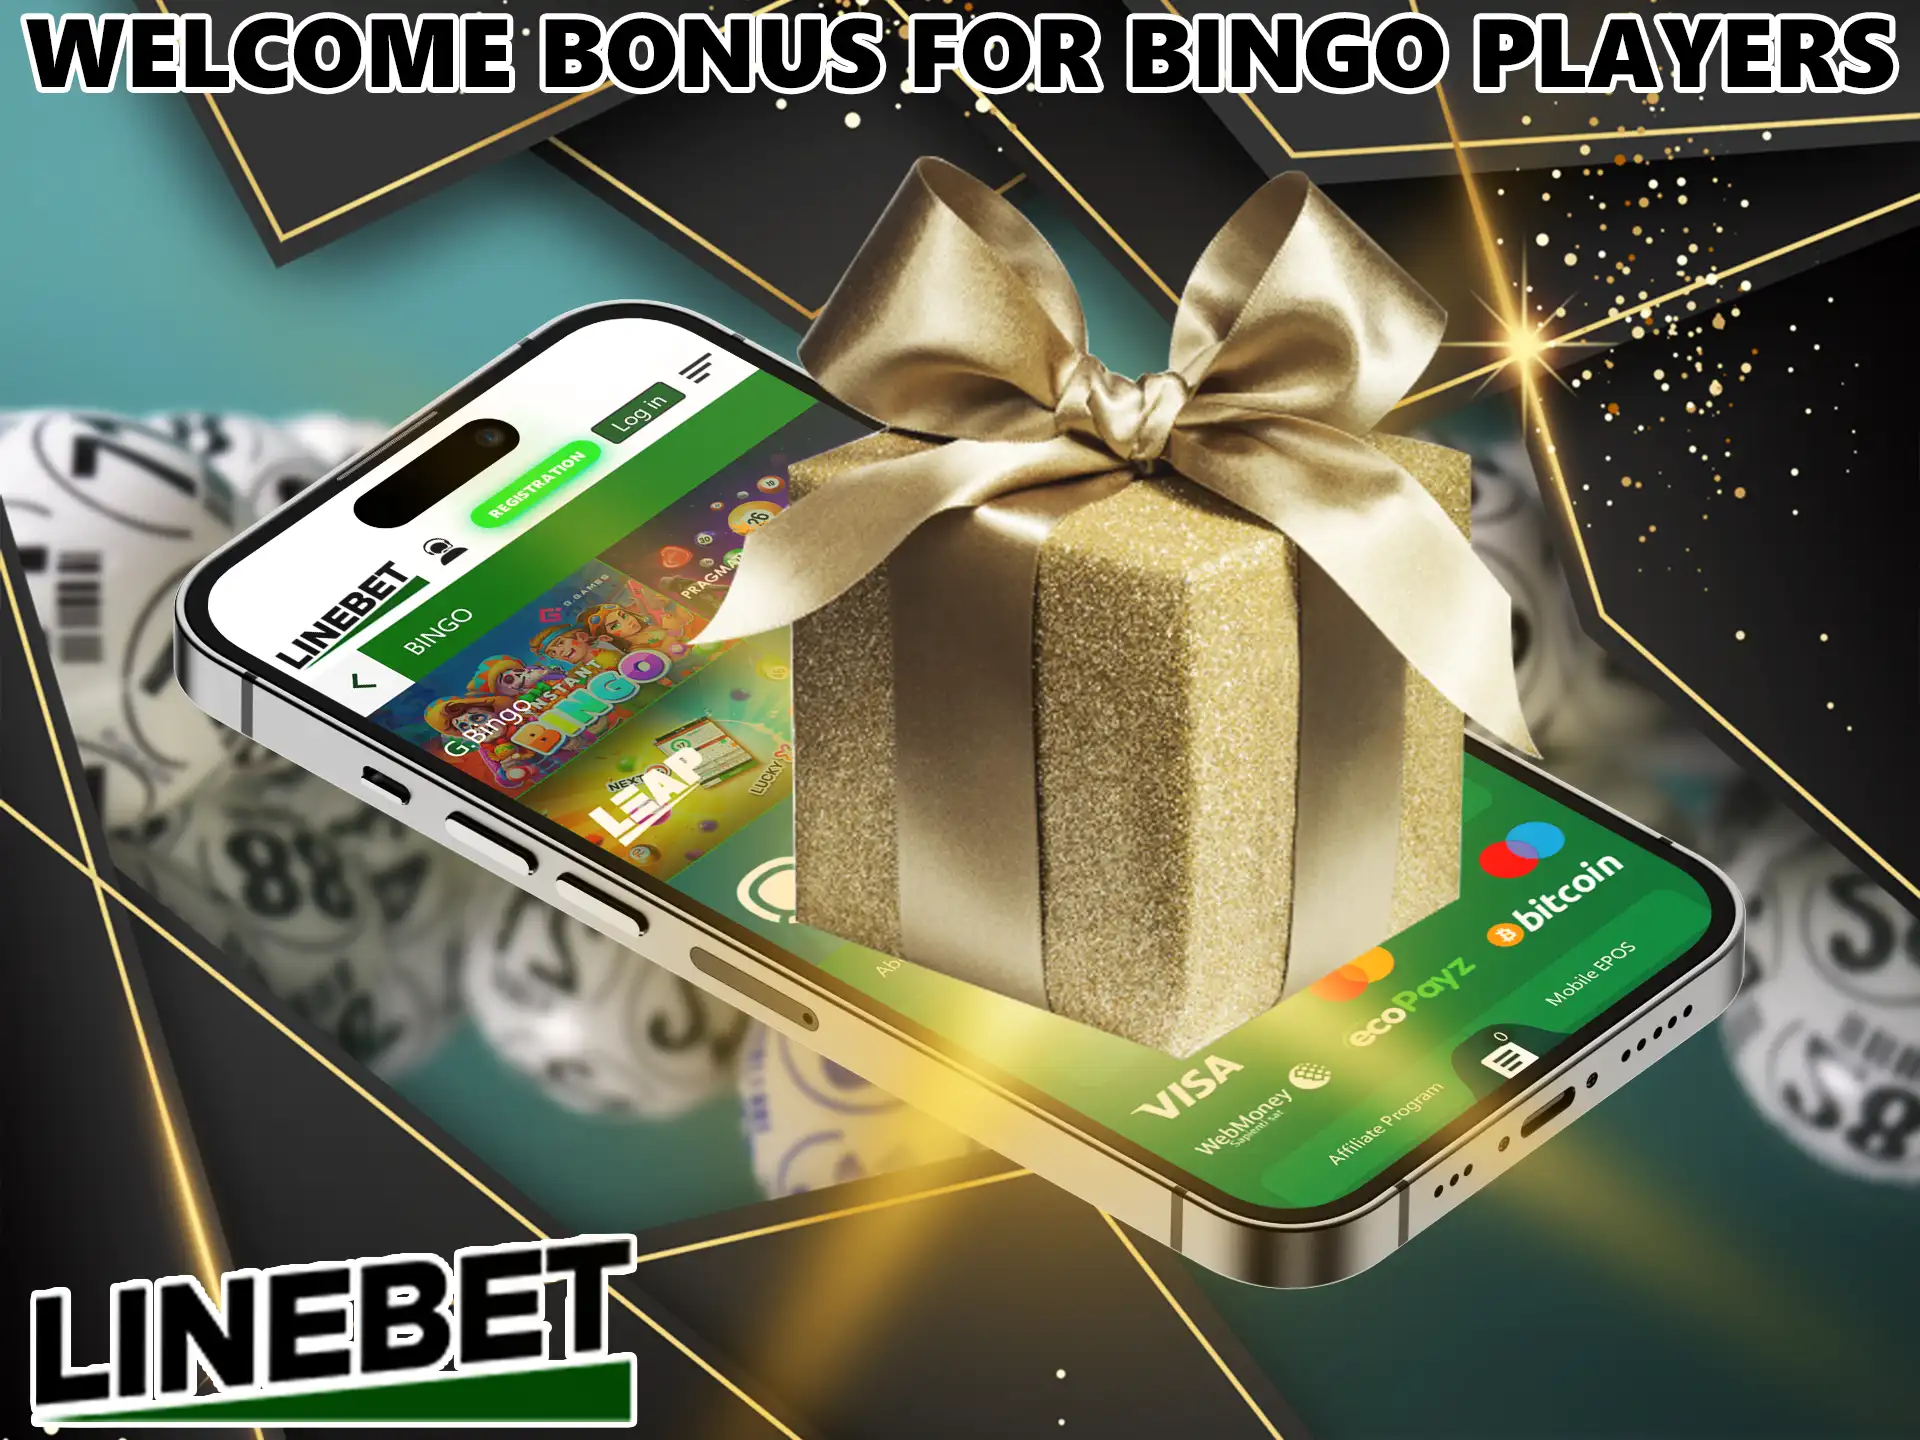 For all Indian players, Linebet Casino has prepared a nice compliment, which will be available after creating an account and making your first deposit.